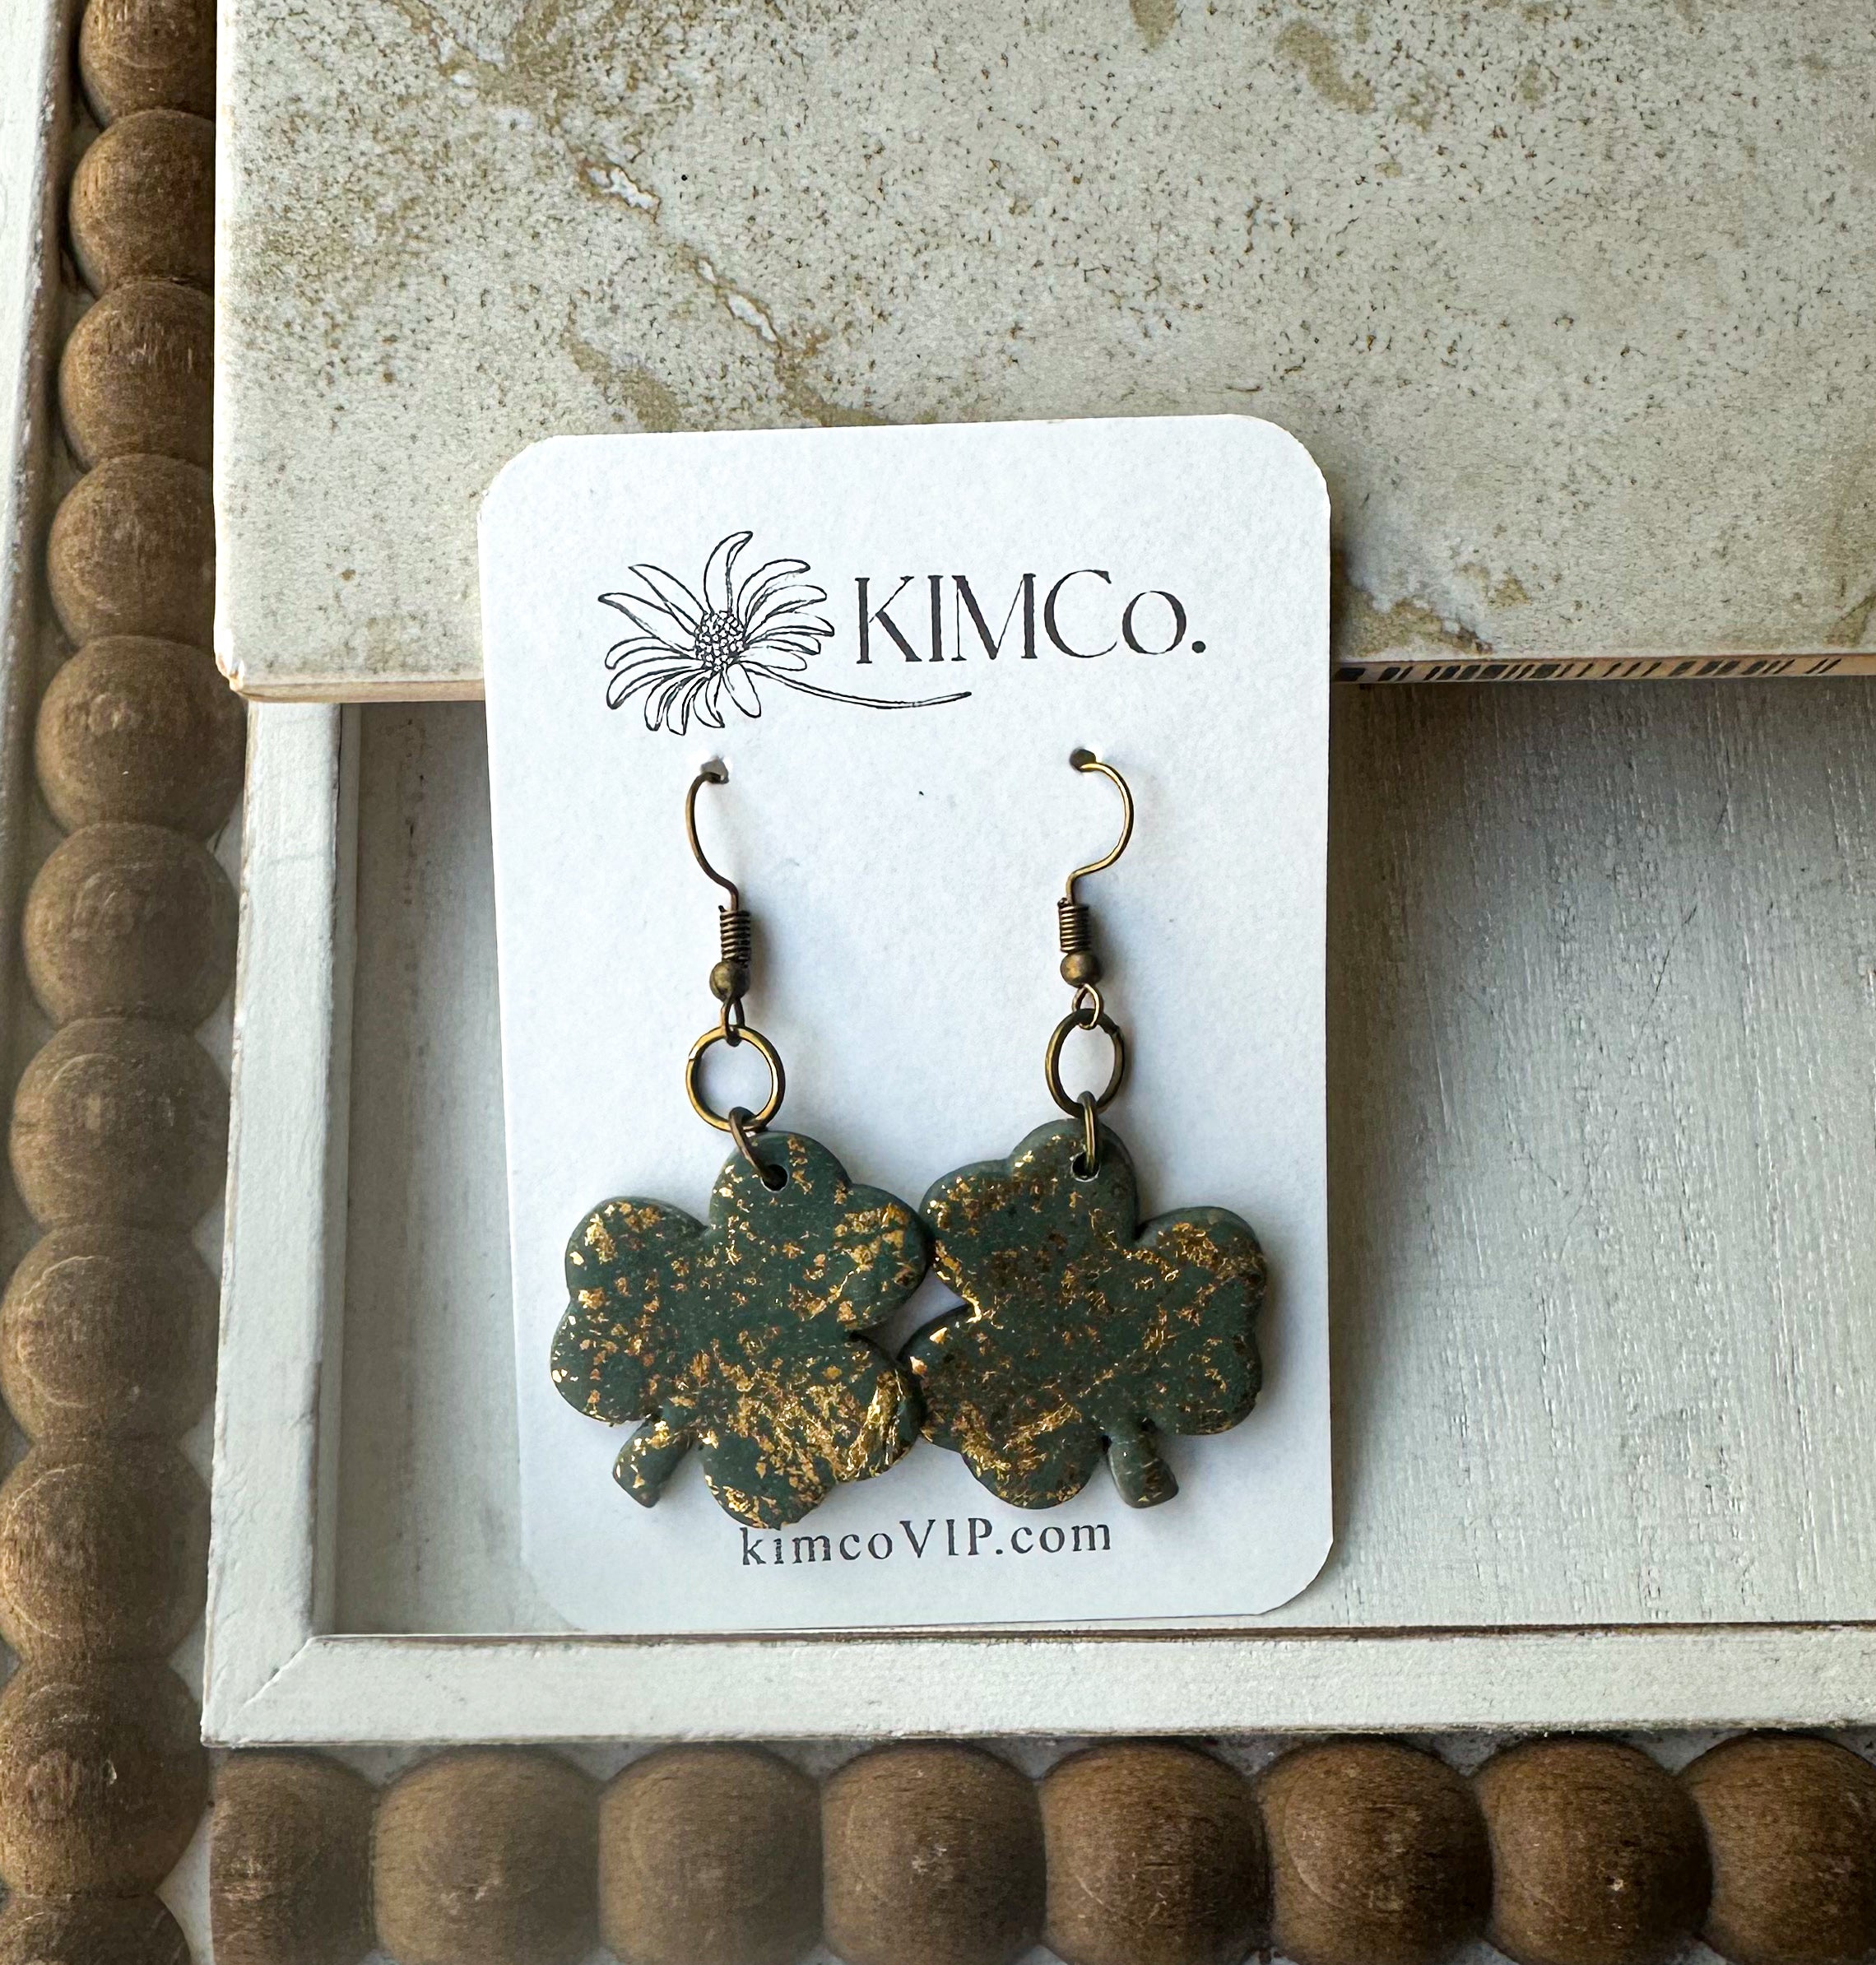 Shamrock Polymer Clay Earrings|statement earrings|gifts for her|colorful earrings|boho earrings|abstract earrings|green earrings|shamrocks|St. Patricks Day